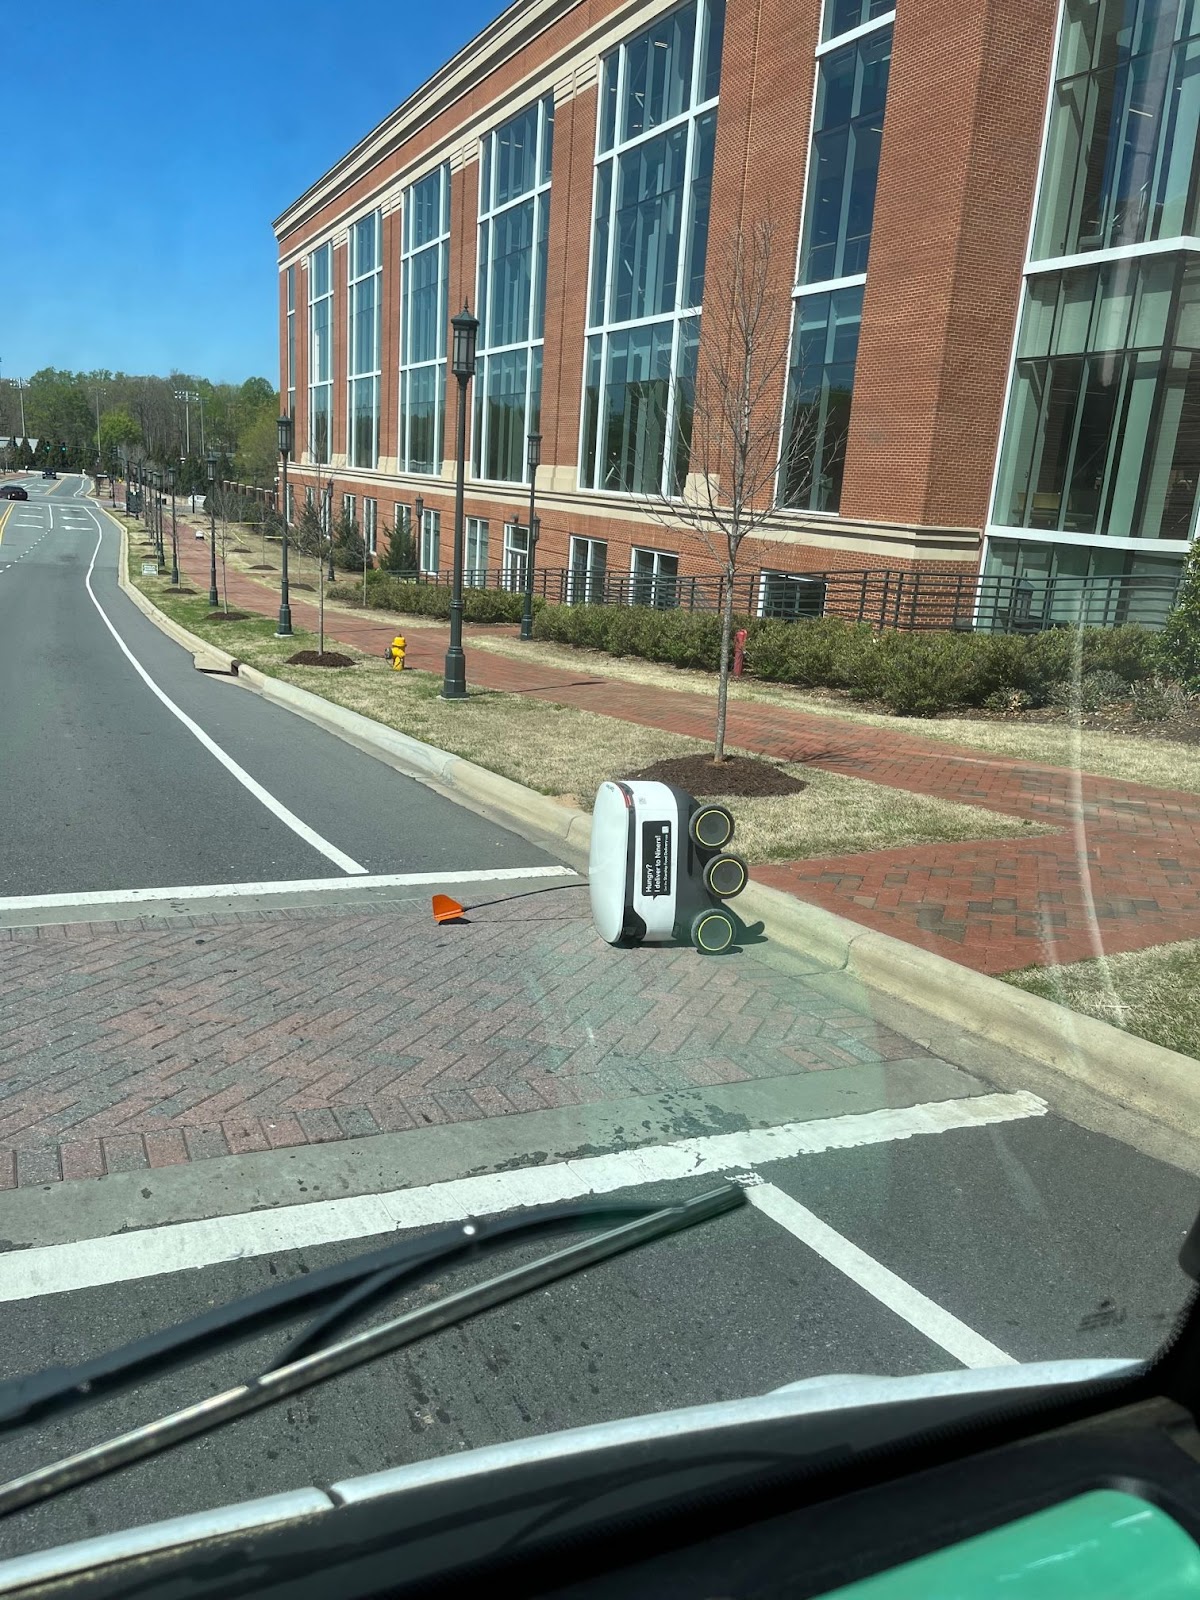 A robot that fell off a curb